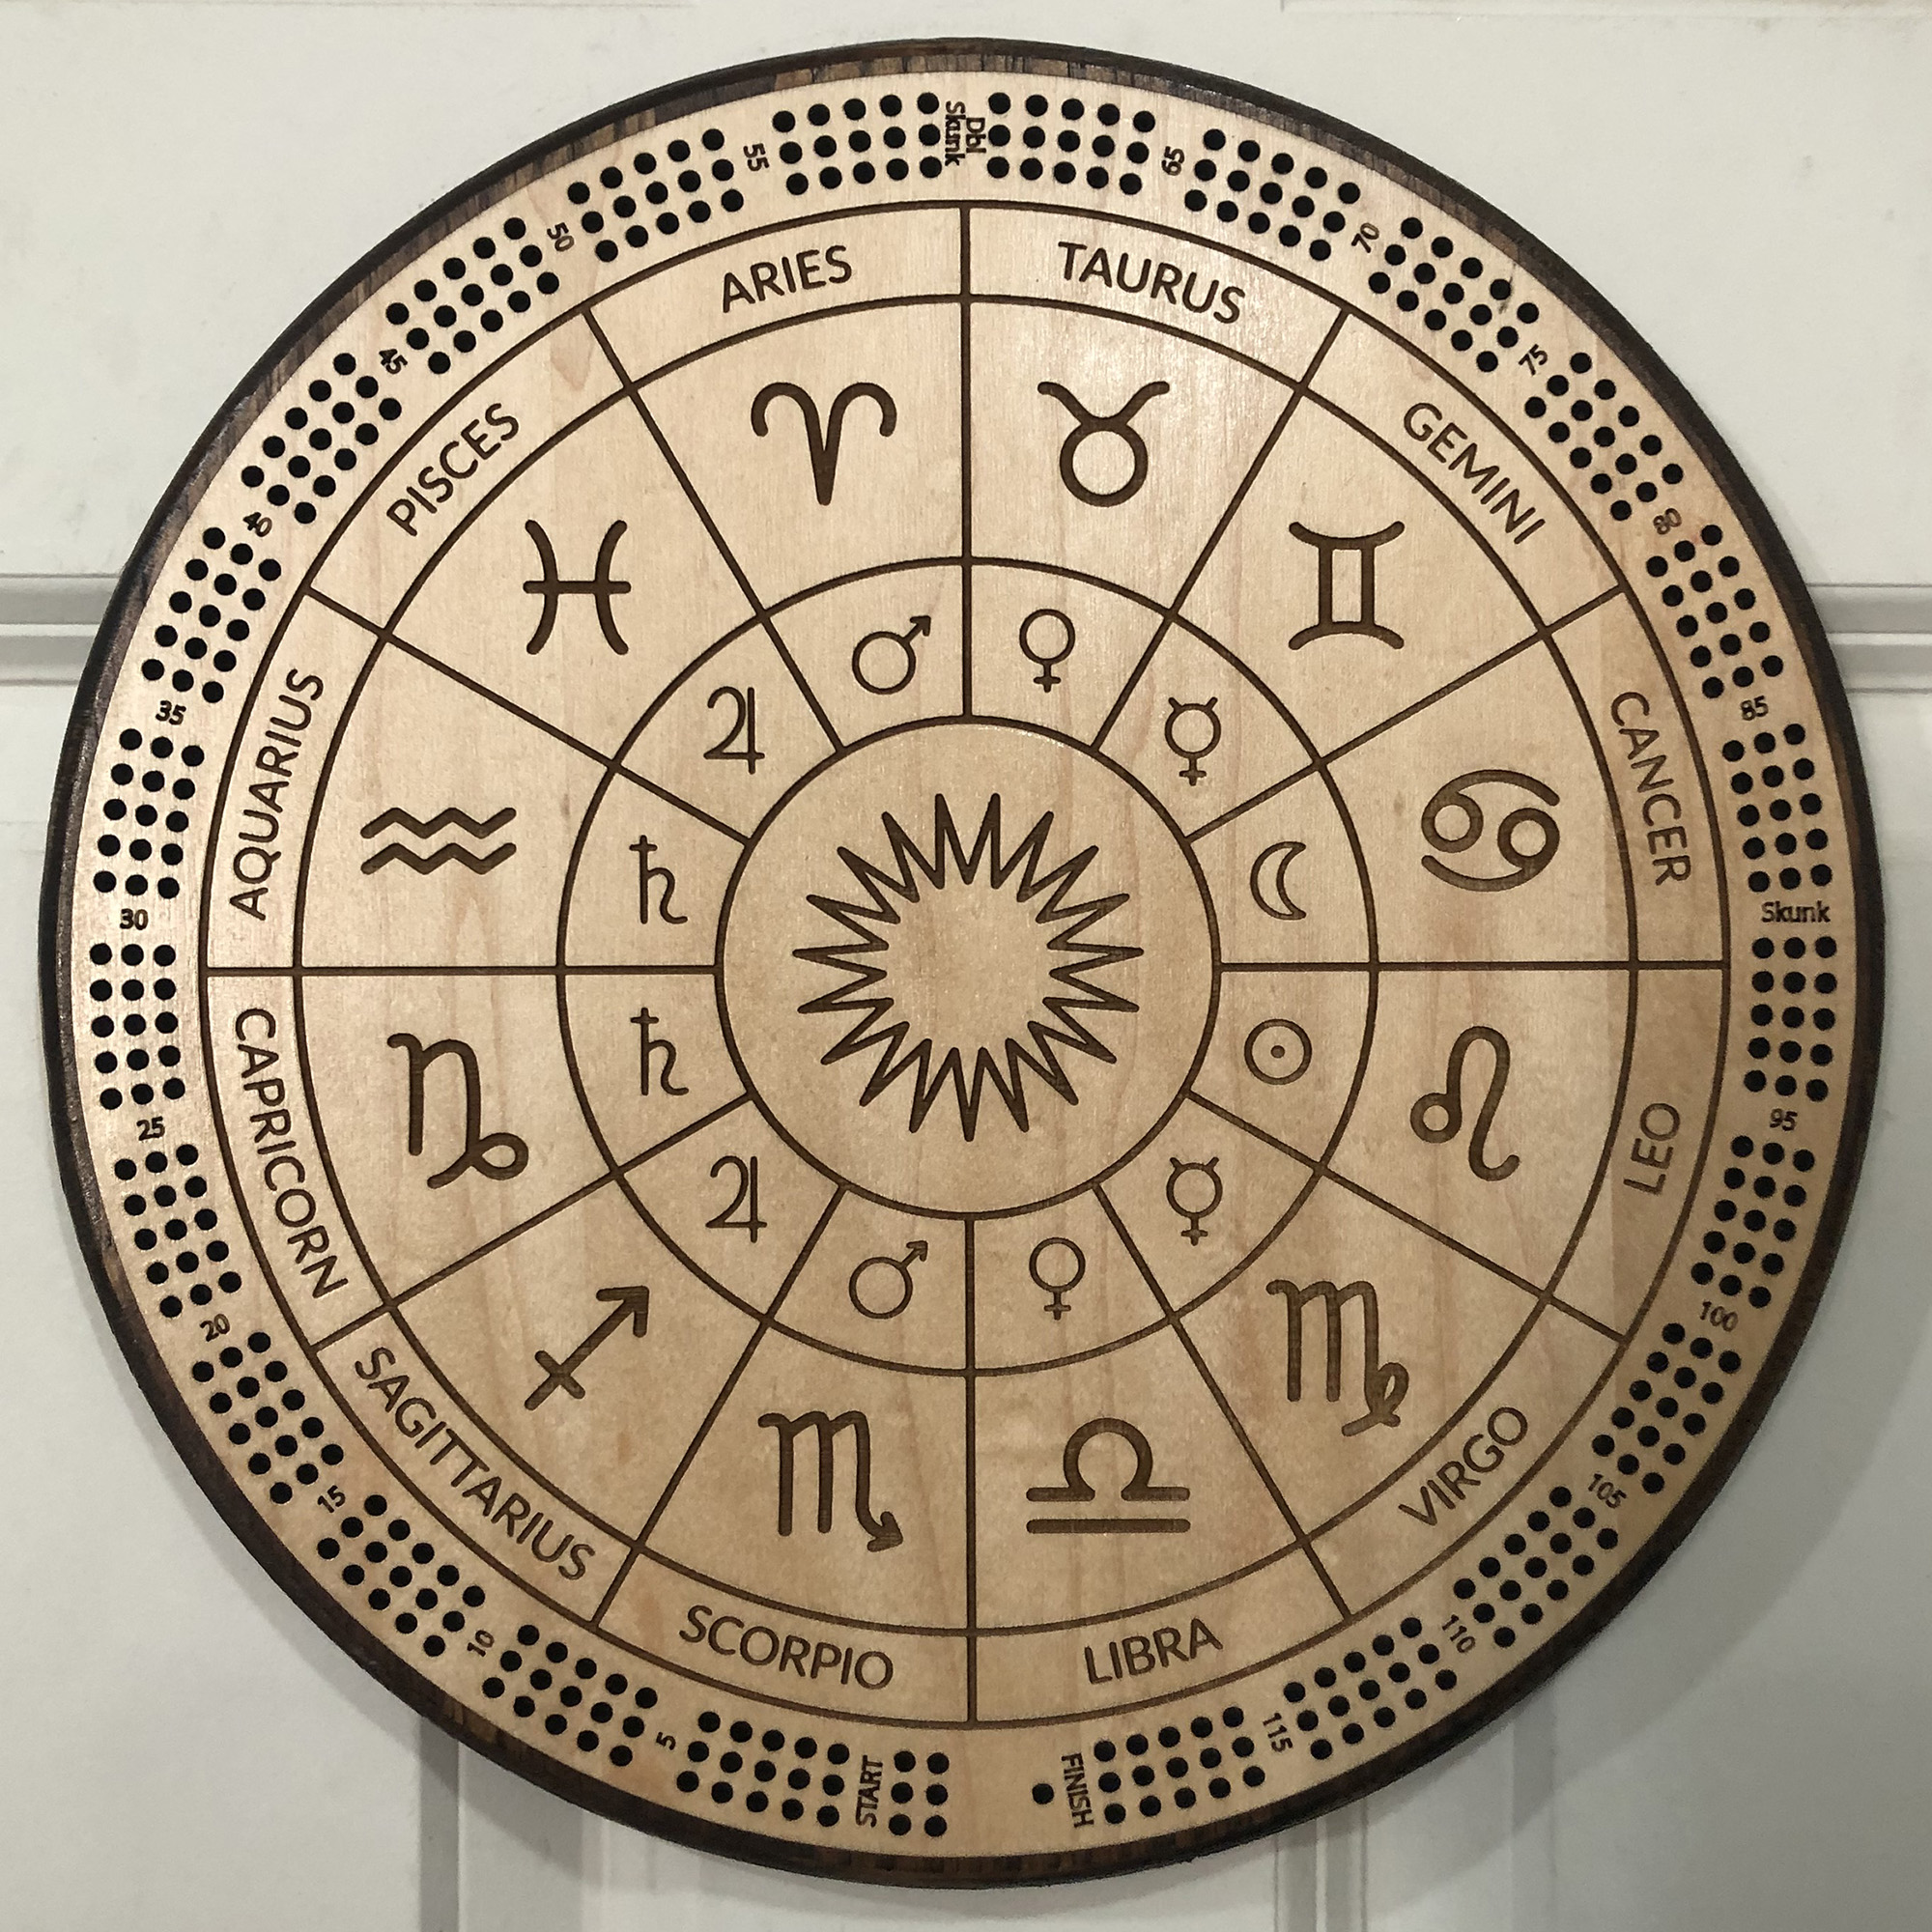 Astrology Wheel cribbage board – round 3 track 120 points with pegs ...